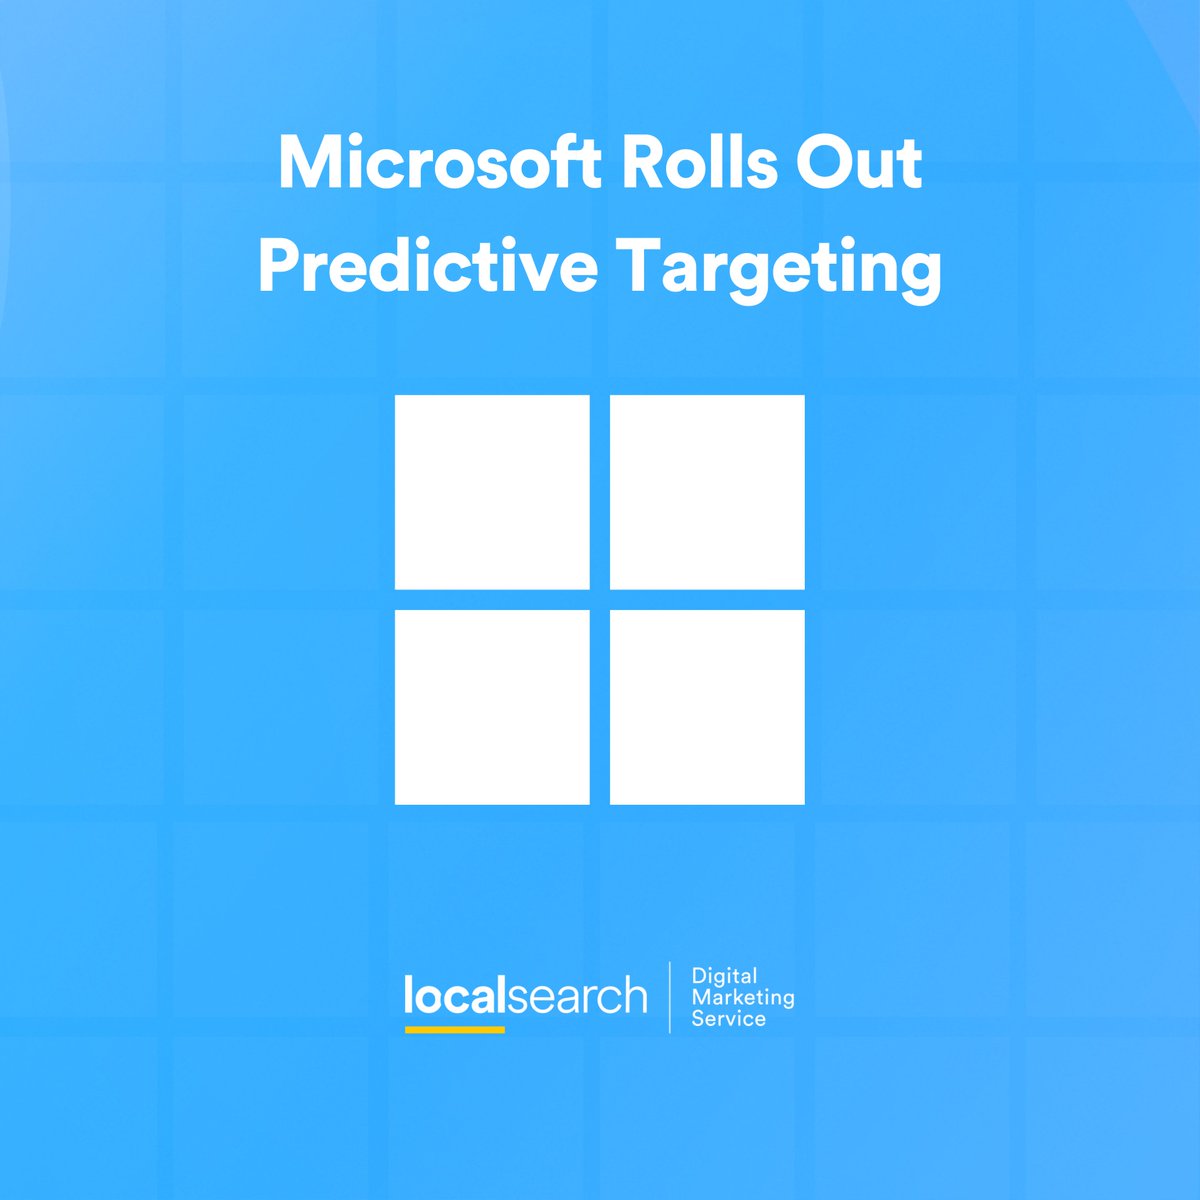 @Microsoft has rolled out predictive targeting to all advertisers! This tool can help you easily find new audiences that you may not have considered targeting previously.

#DigitalMarketing